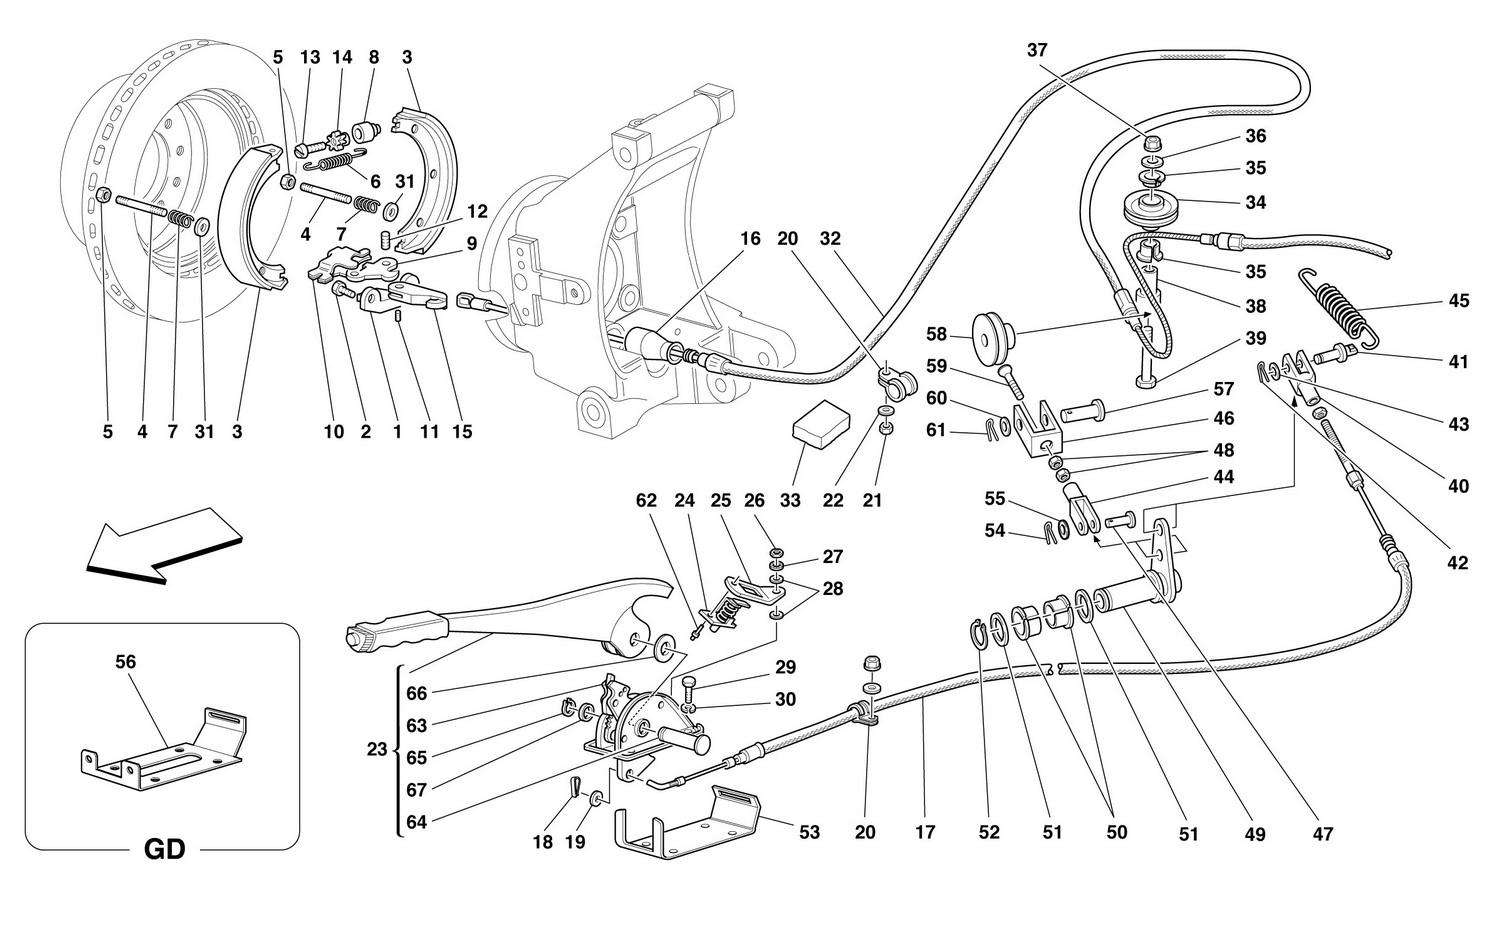 Schematic: Hand-Brake Control -Valid For 456M Gta